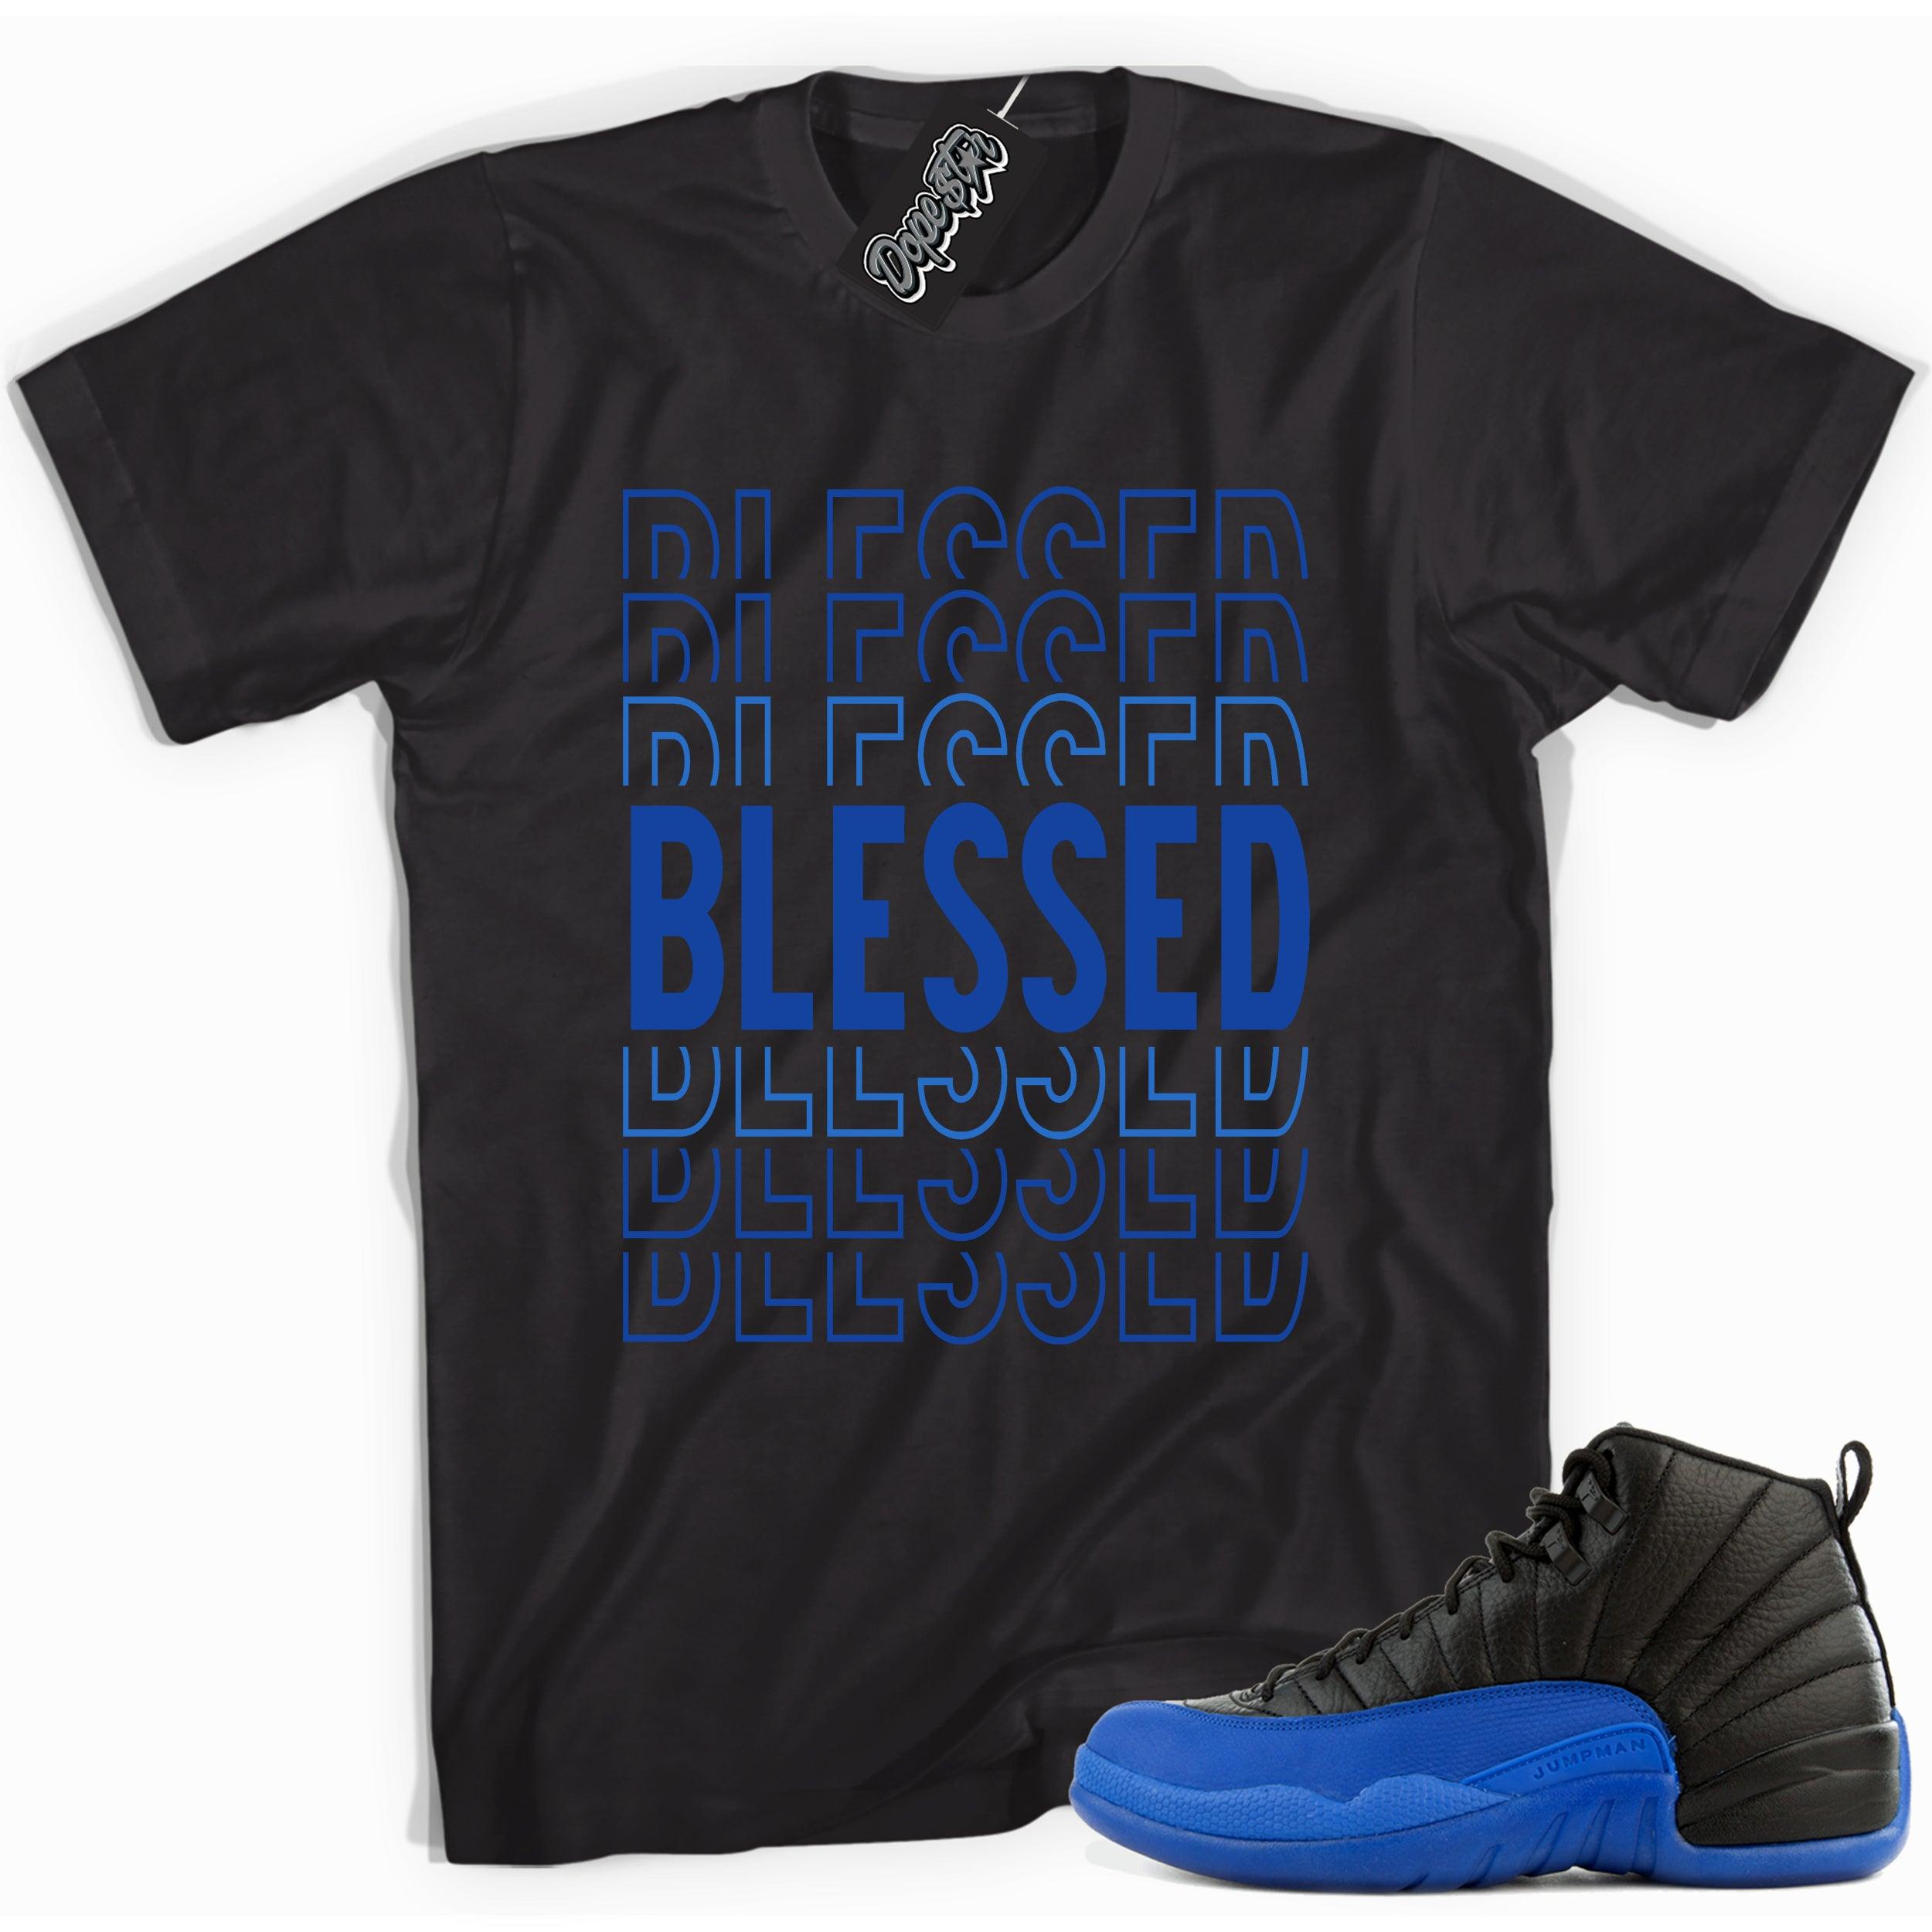 Cool black graphic tee with 'blessed' print, that perfectly matches  Air Jordan 12 Retro Black Game Royal sneakers.